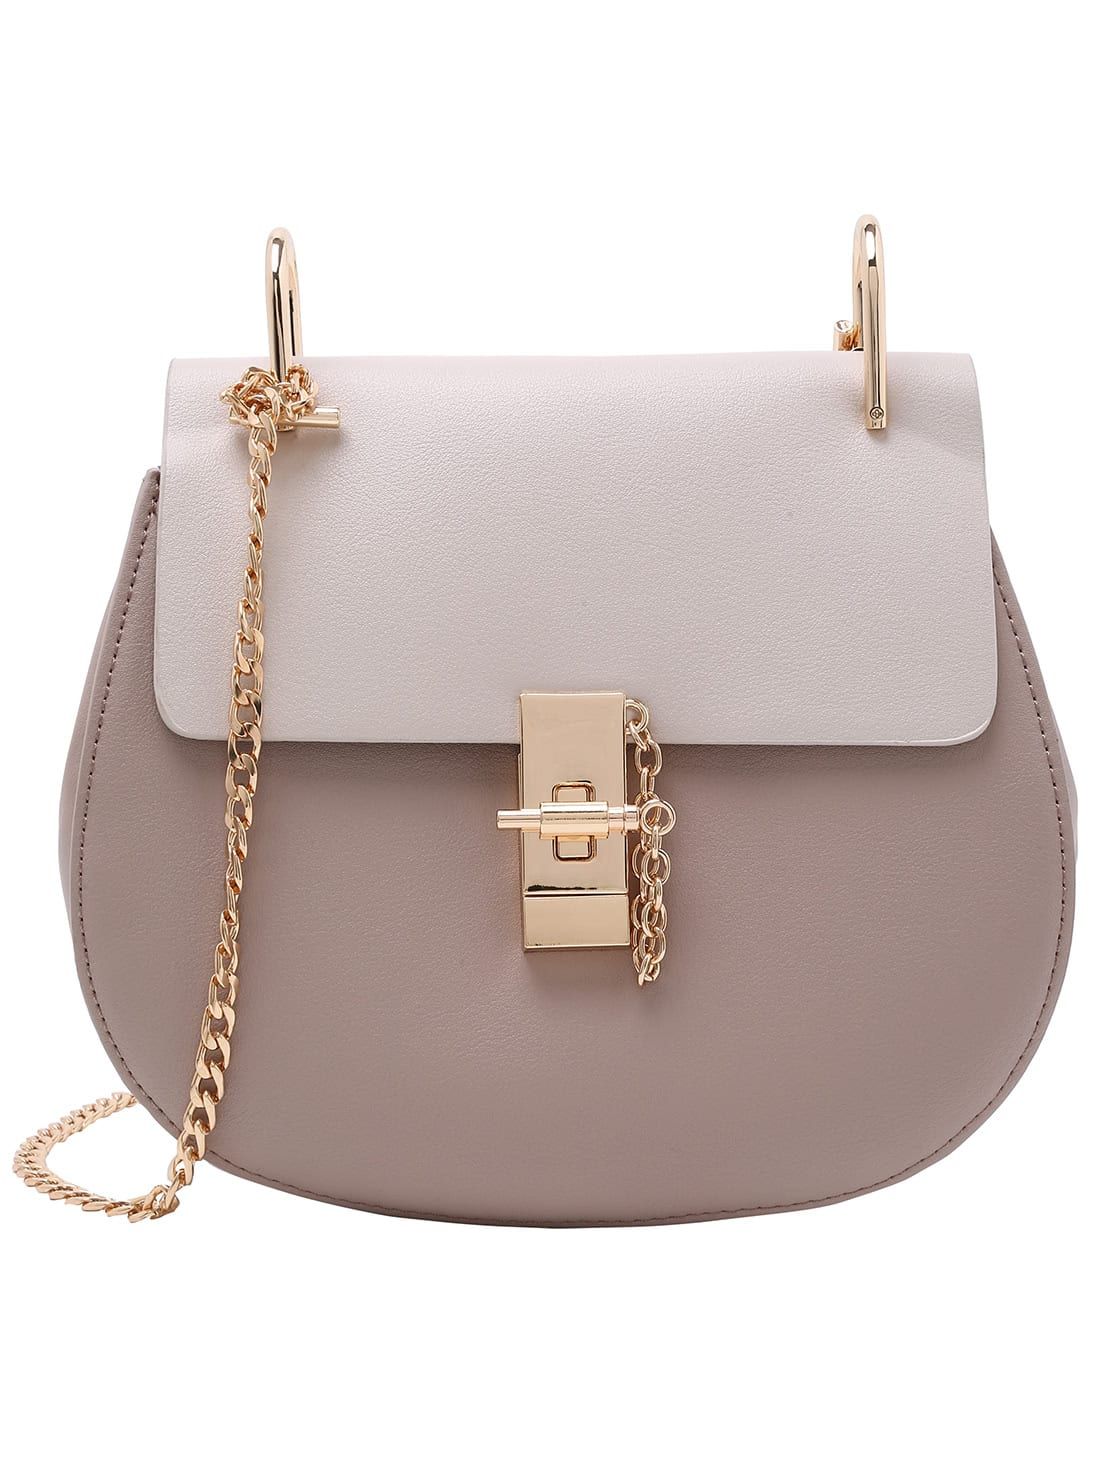 Contrast Faux Leather Chain Saddle Bag - Grey | SHEIN